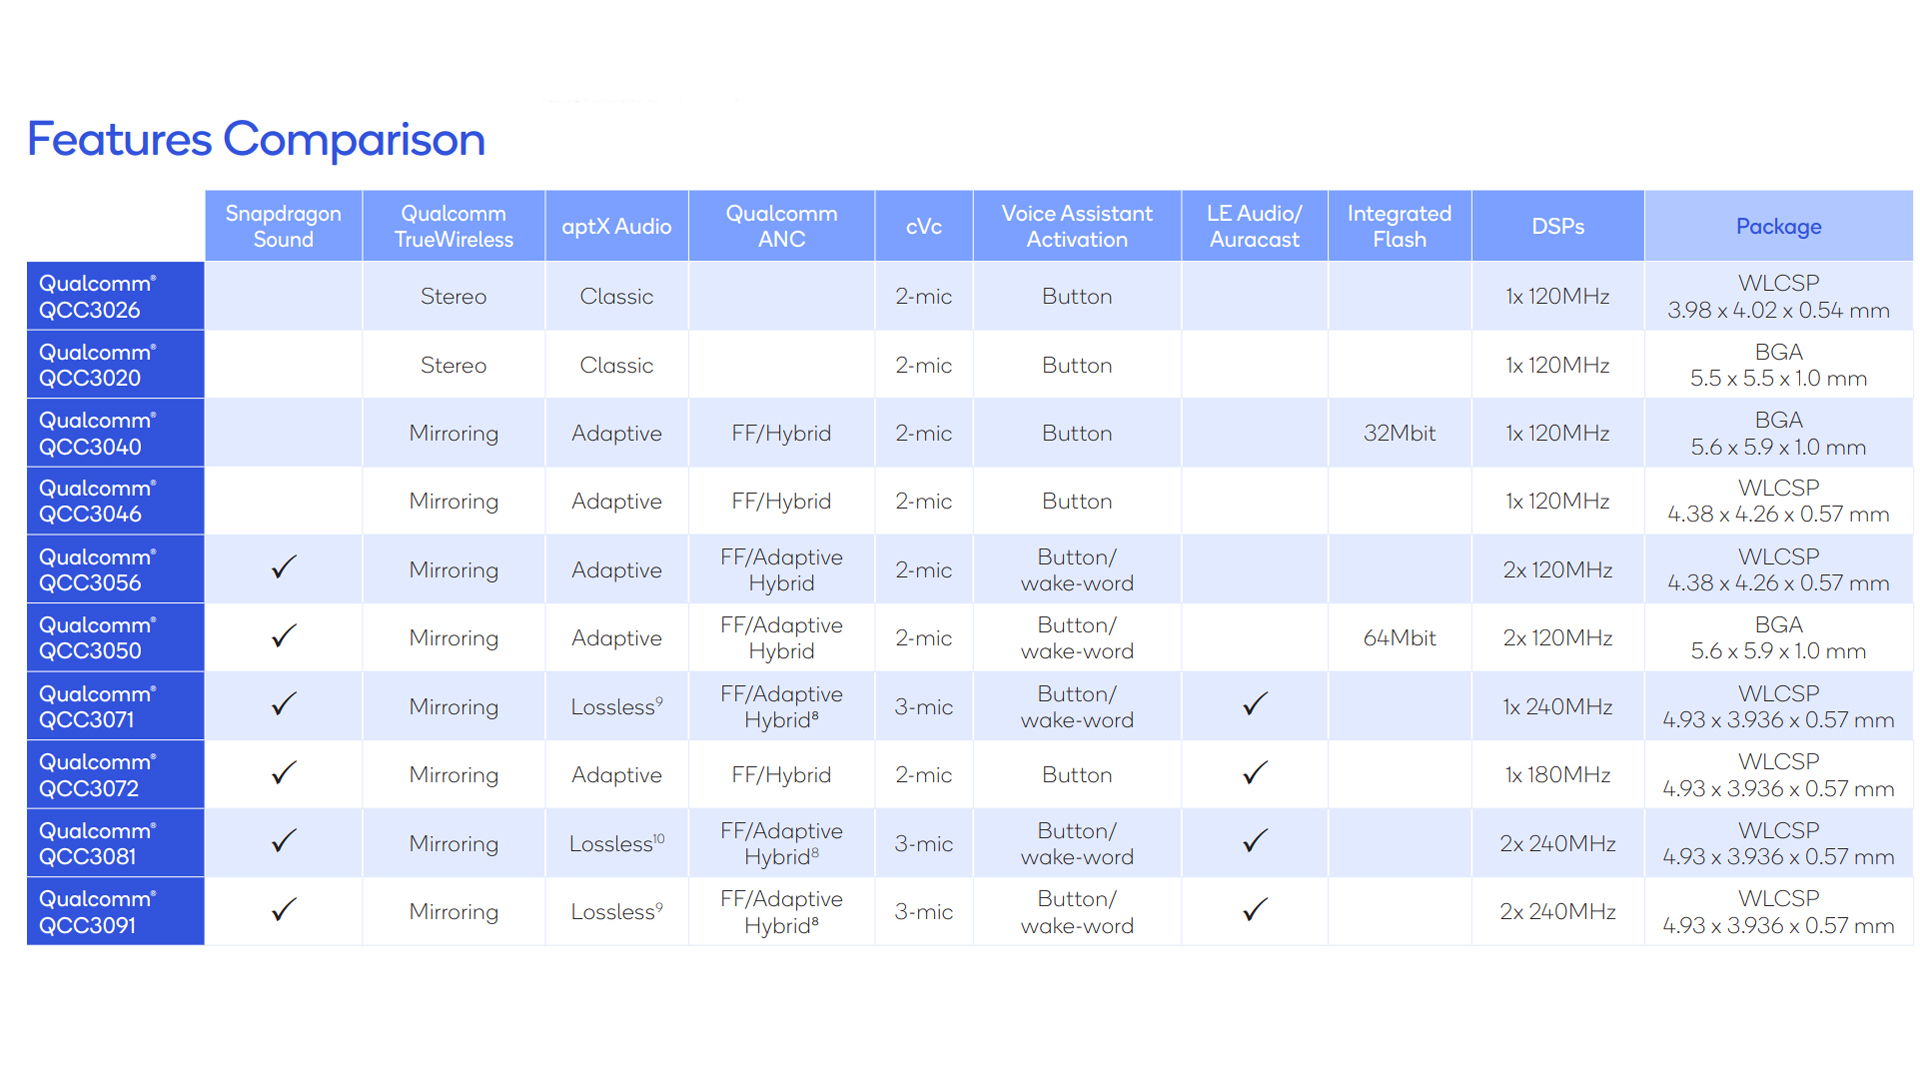 A chart containing specific information about which chipsets will have which features for the Qualcomm S3 Gen 3 platform.